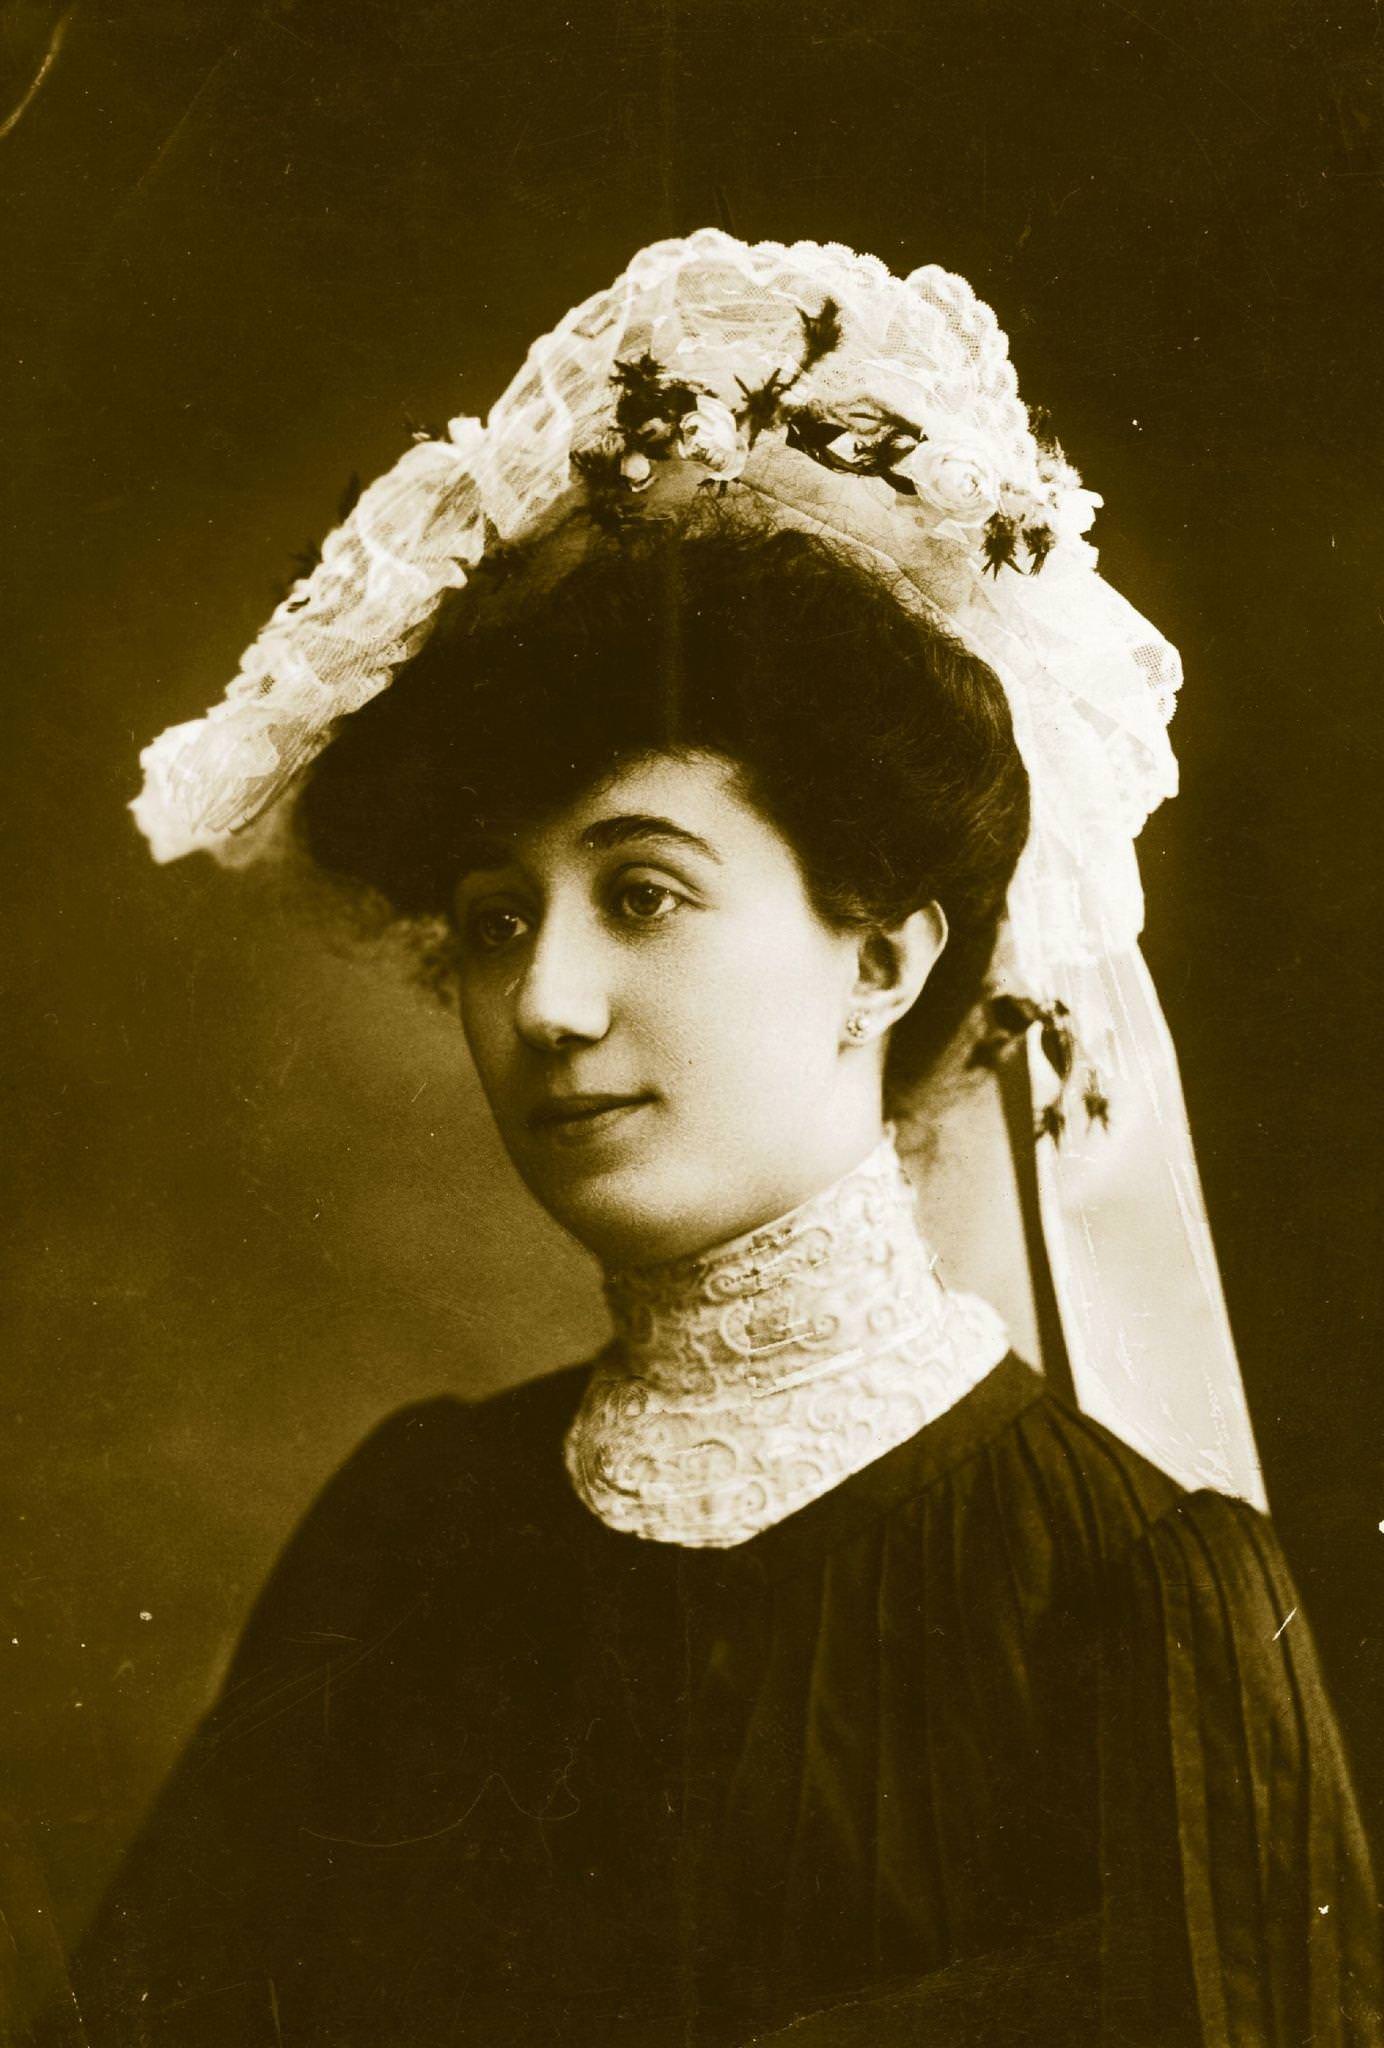 An Edwardian lady poses with a parasol in a timeless portrait